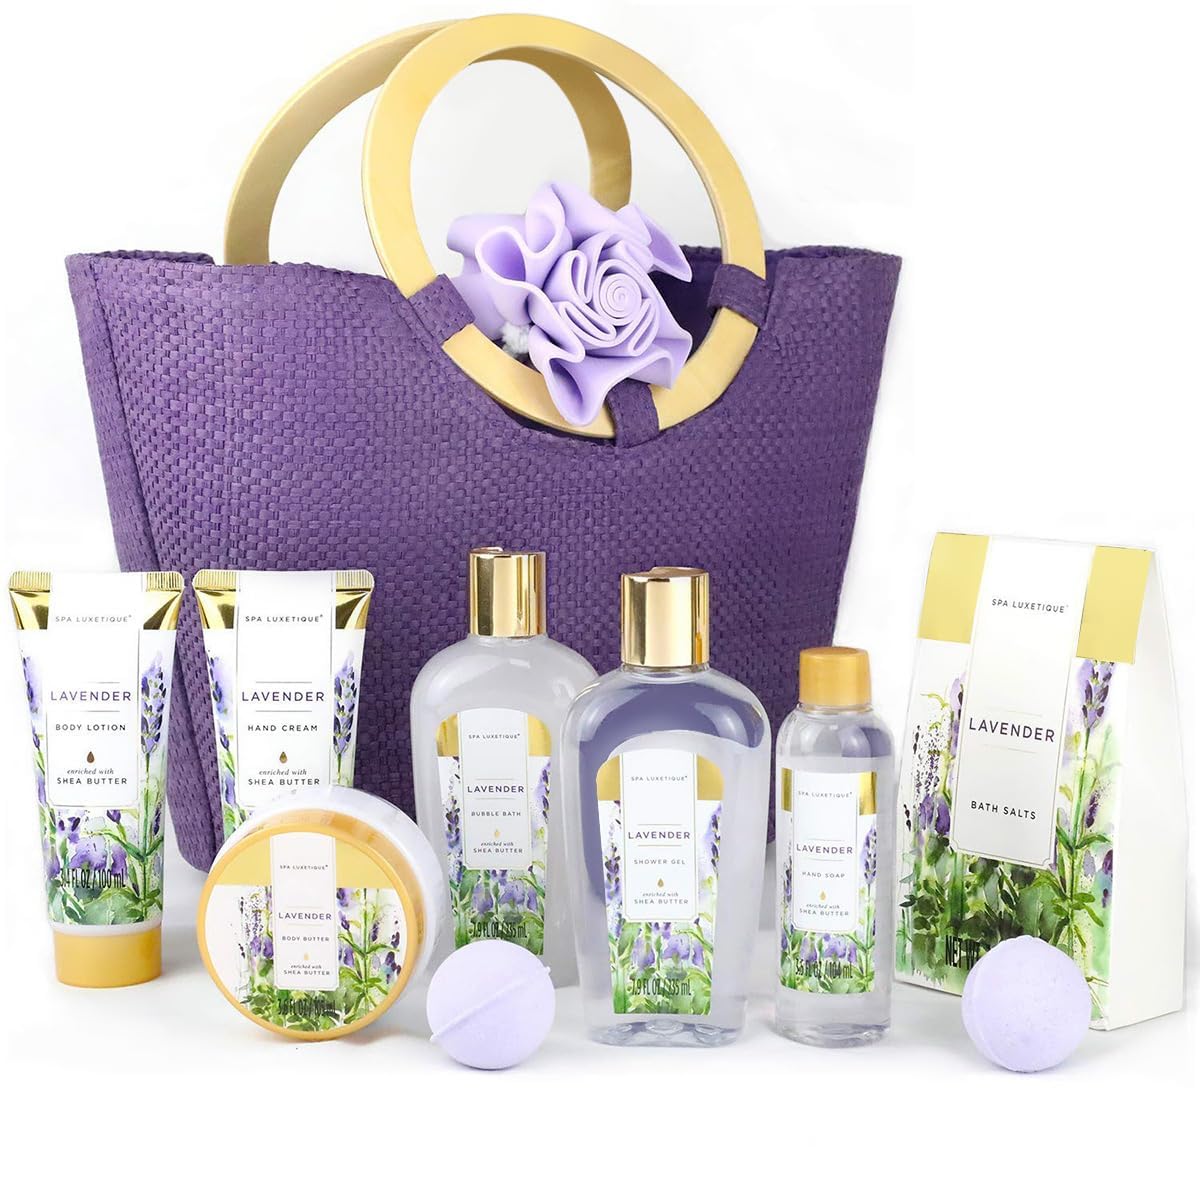 Green Canyon & Spa Luxetique Gift Sets